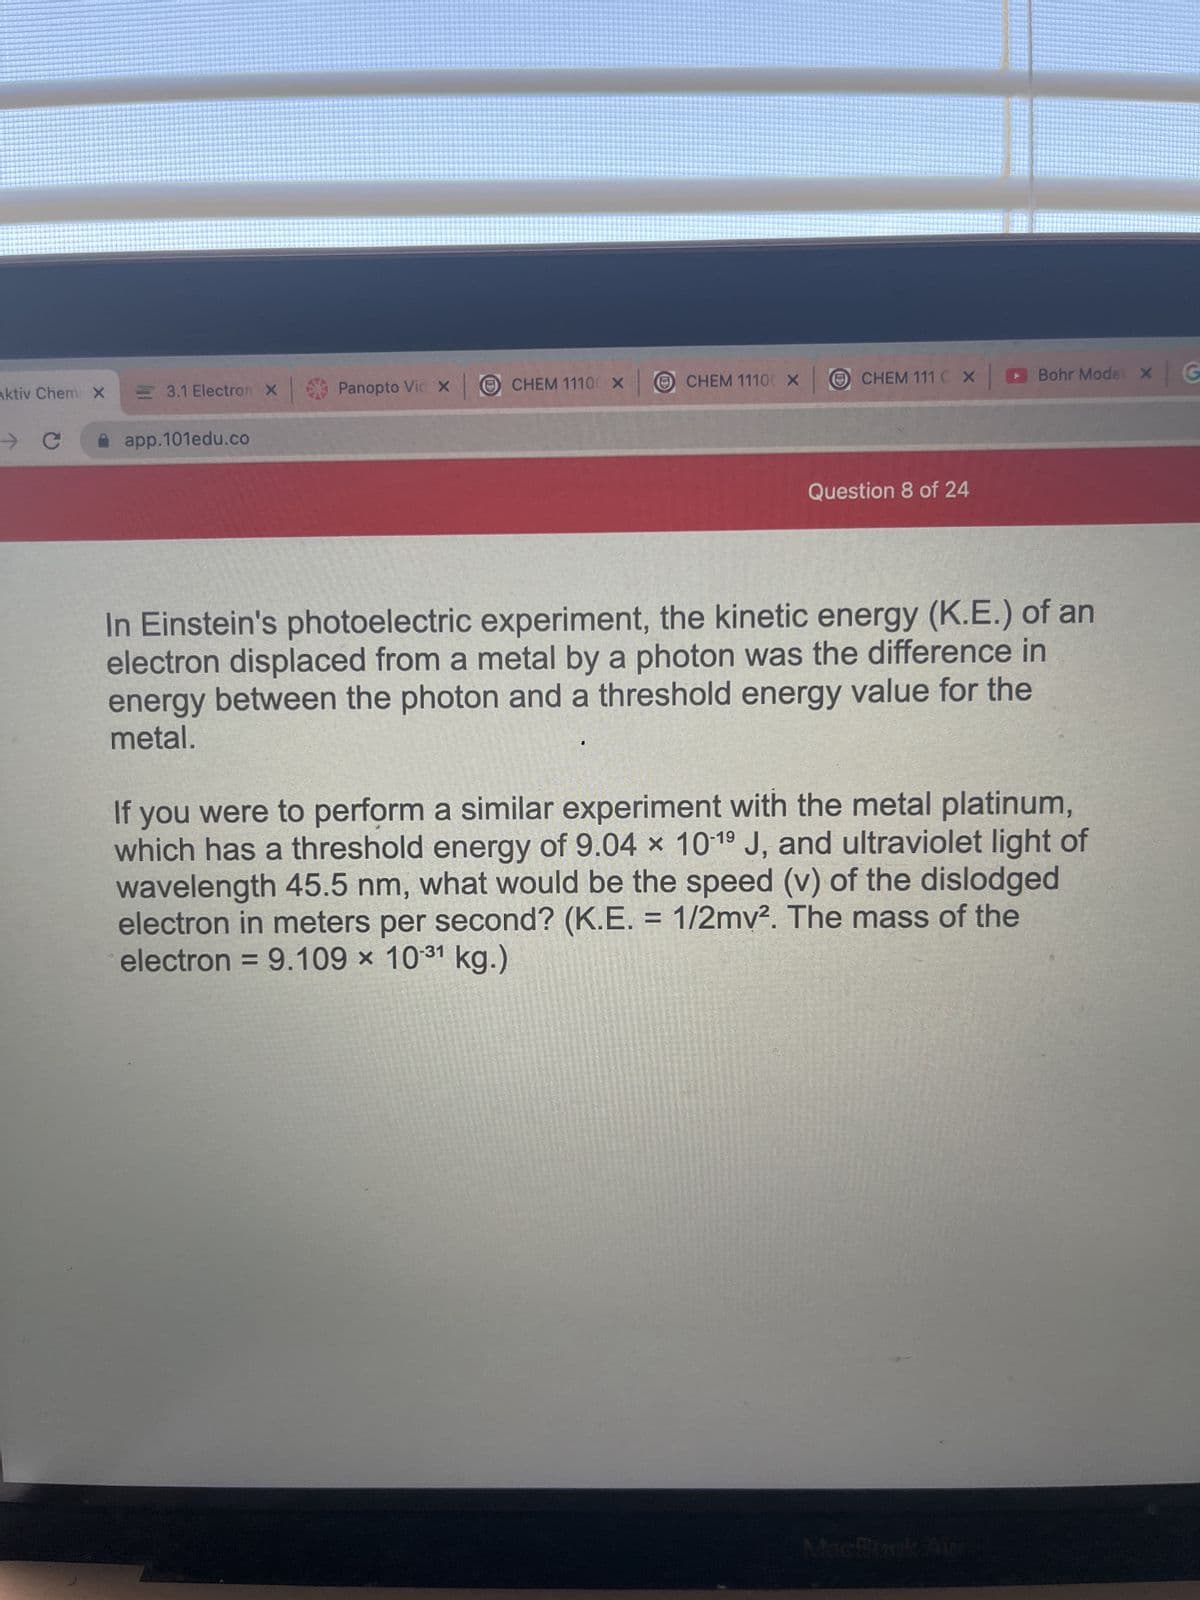 Aktiv Chem X
→ C
3.1 Electron X
app.101edu.co
| Panopto Vic x | Ⓒ CHEM 11100 X CHEM 11100 X
ⒸCHEM 111 C X Bohr Model X x G
*
Question 8 of 24
In Einstein's photoelectric experiment, the kinetic energy (K.E.) of an
electron displaced from a metal by a photon was the difference in
energy between the photon and a threshold energy value for the
metal.
If you were to perform a similar experiment with the metal platinum,
which has a threshold energy of 9.04 x 10-1⁹ J, and ultraviolet light of
wavelength 45.5 nm, what would be the speed (v) of the dislodged
electron in meters per second? (K.E. = 1/2mv². The mass of the
electron = 9.109 × 10-31 kg.)
MacBook Aur